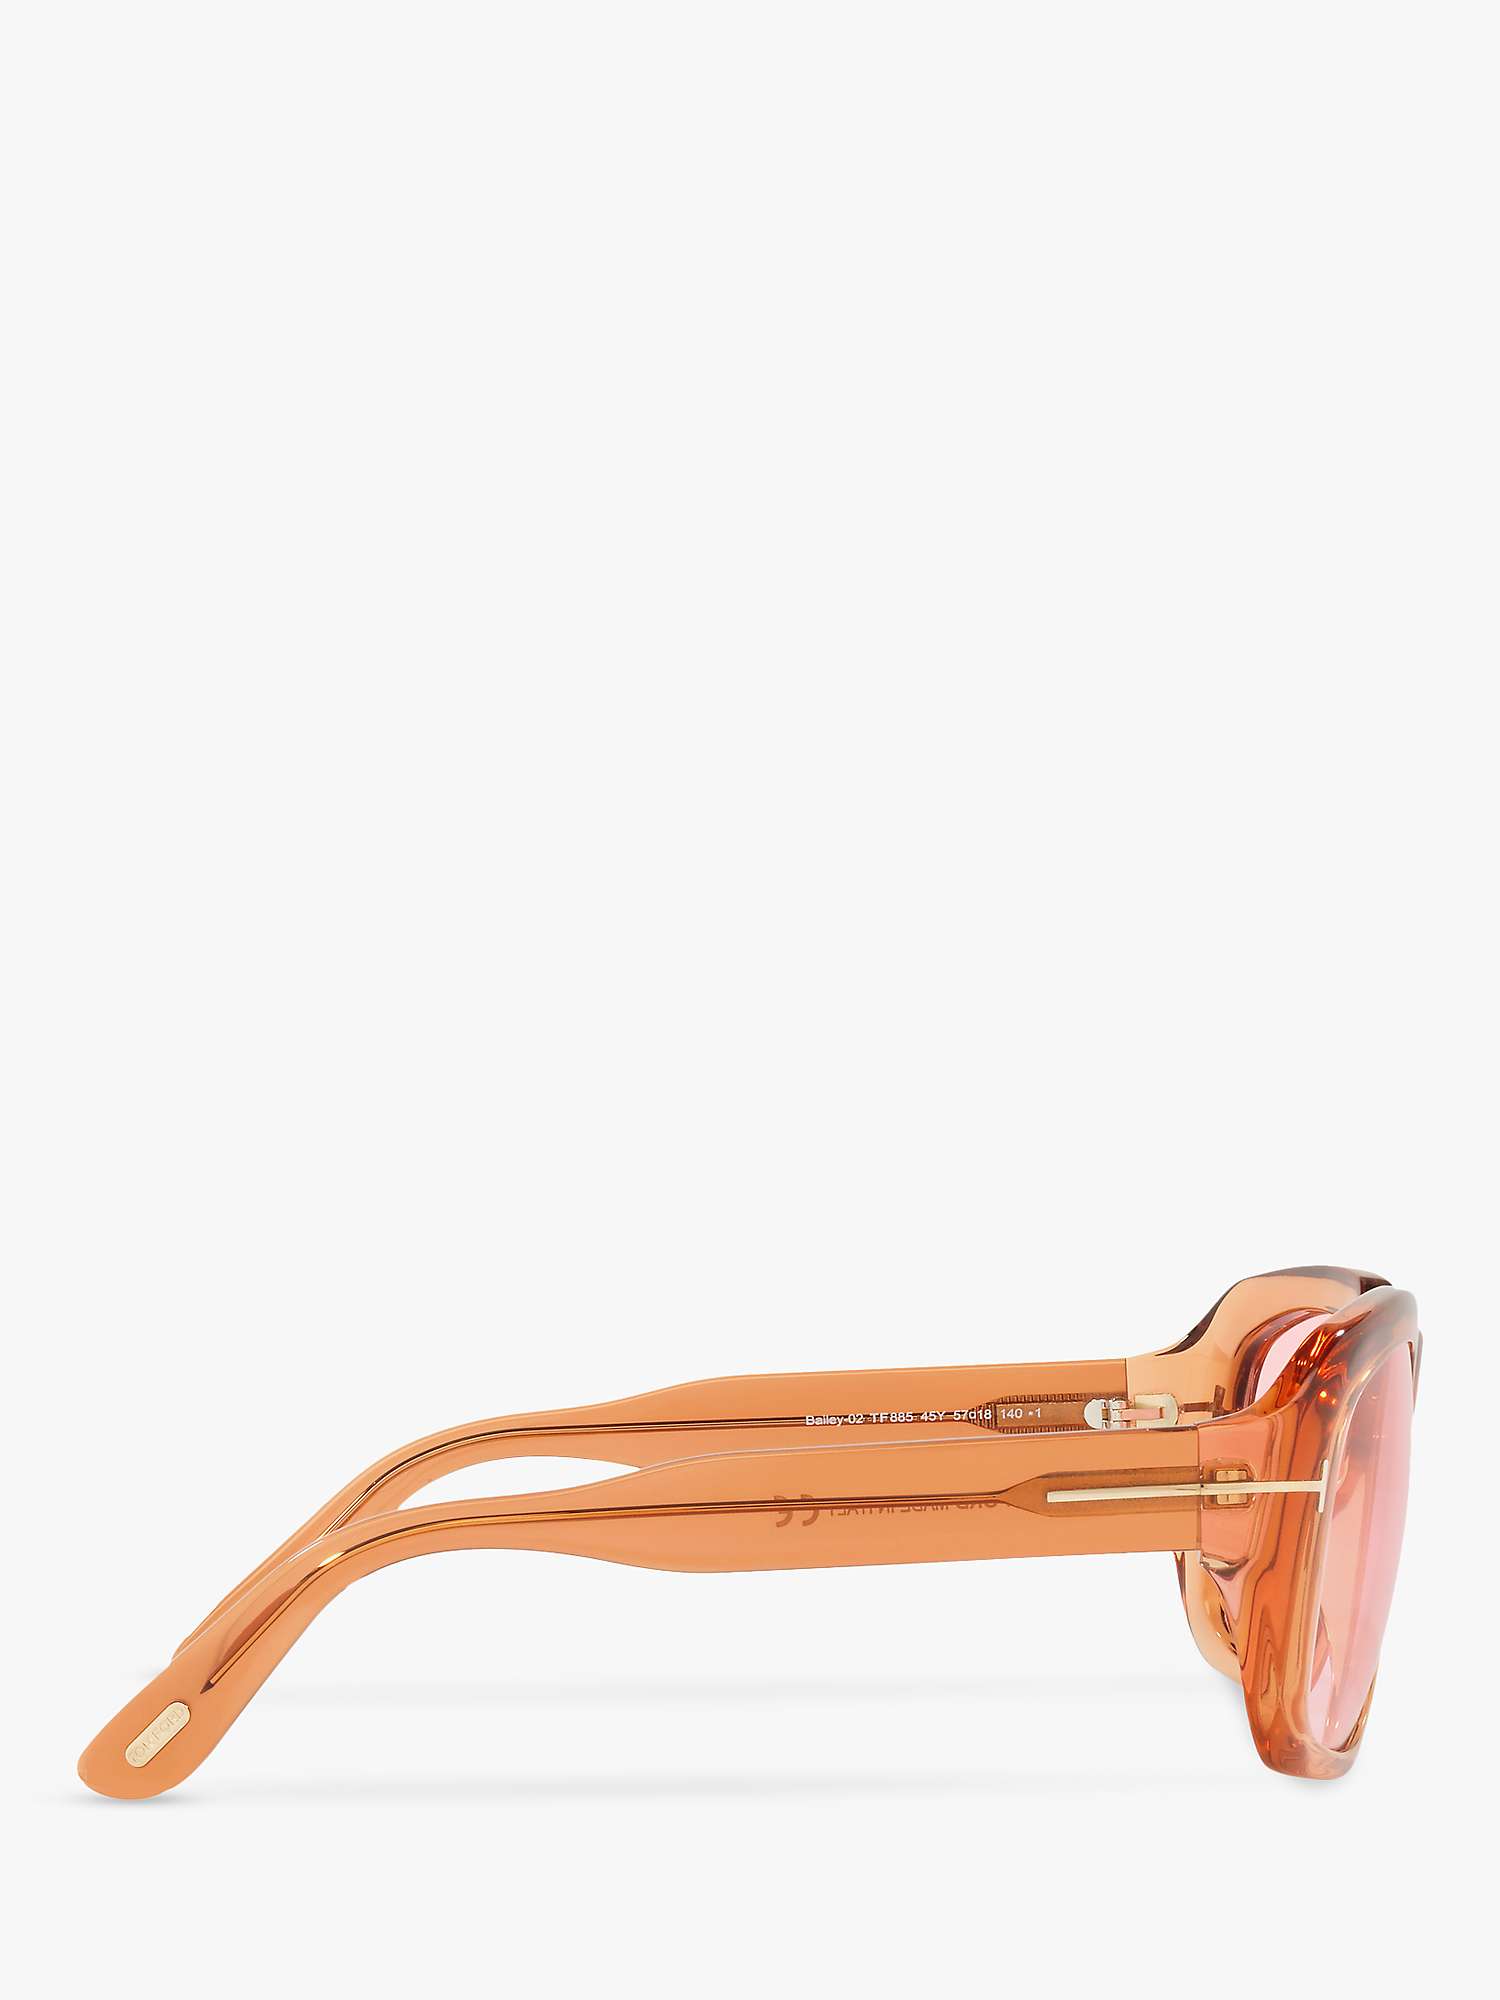 Buy TOM FORD FT0885 Men's Bailey Square Sunglasses, Shiny Brown Online at johnlewis.com